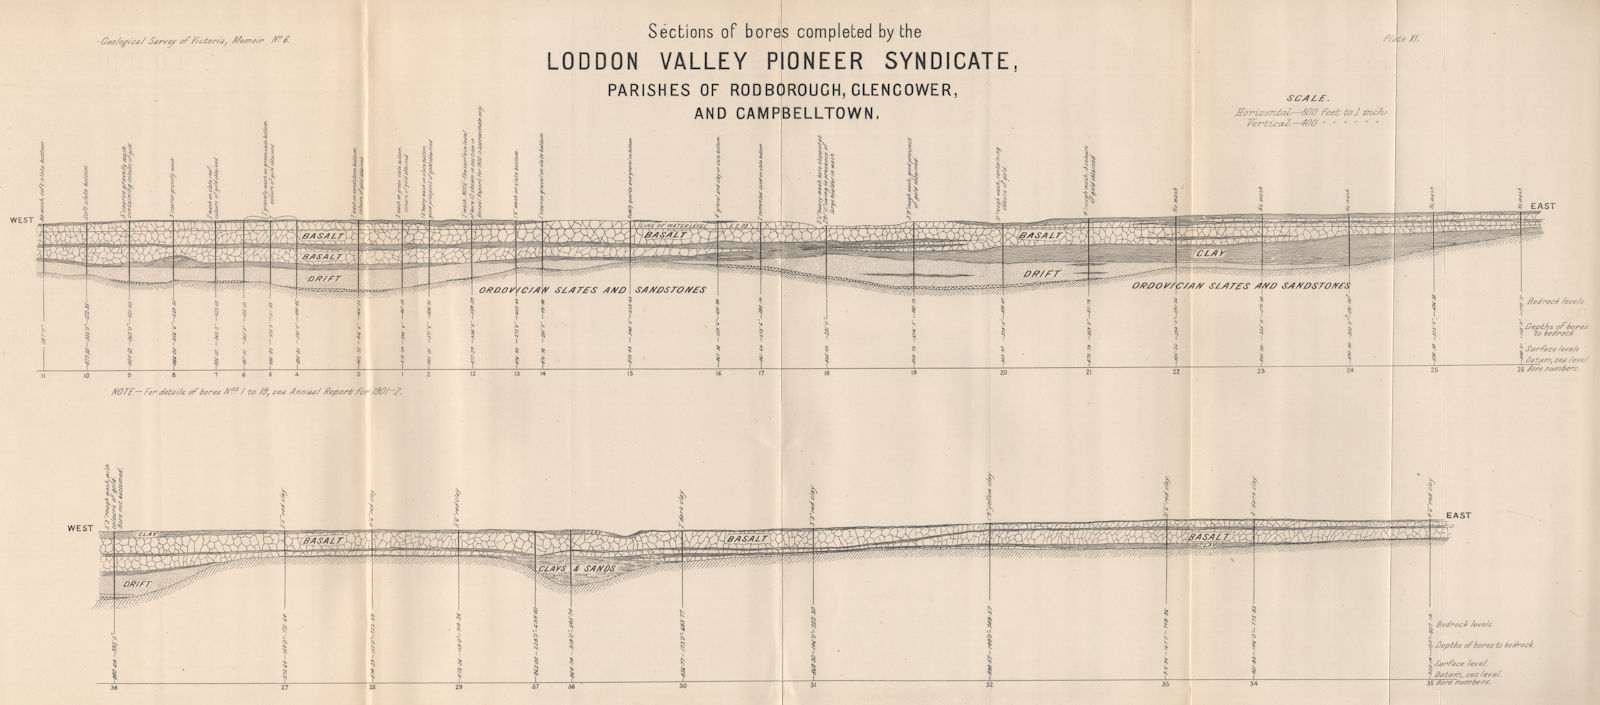 Associate Product Loddon Valley Pioneer Syndicate. Rodborough Glengower Campbelltown 1909 map